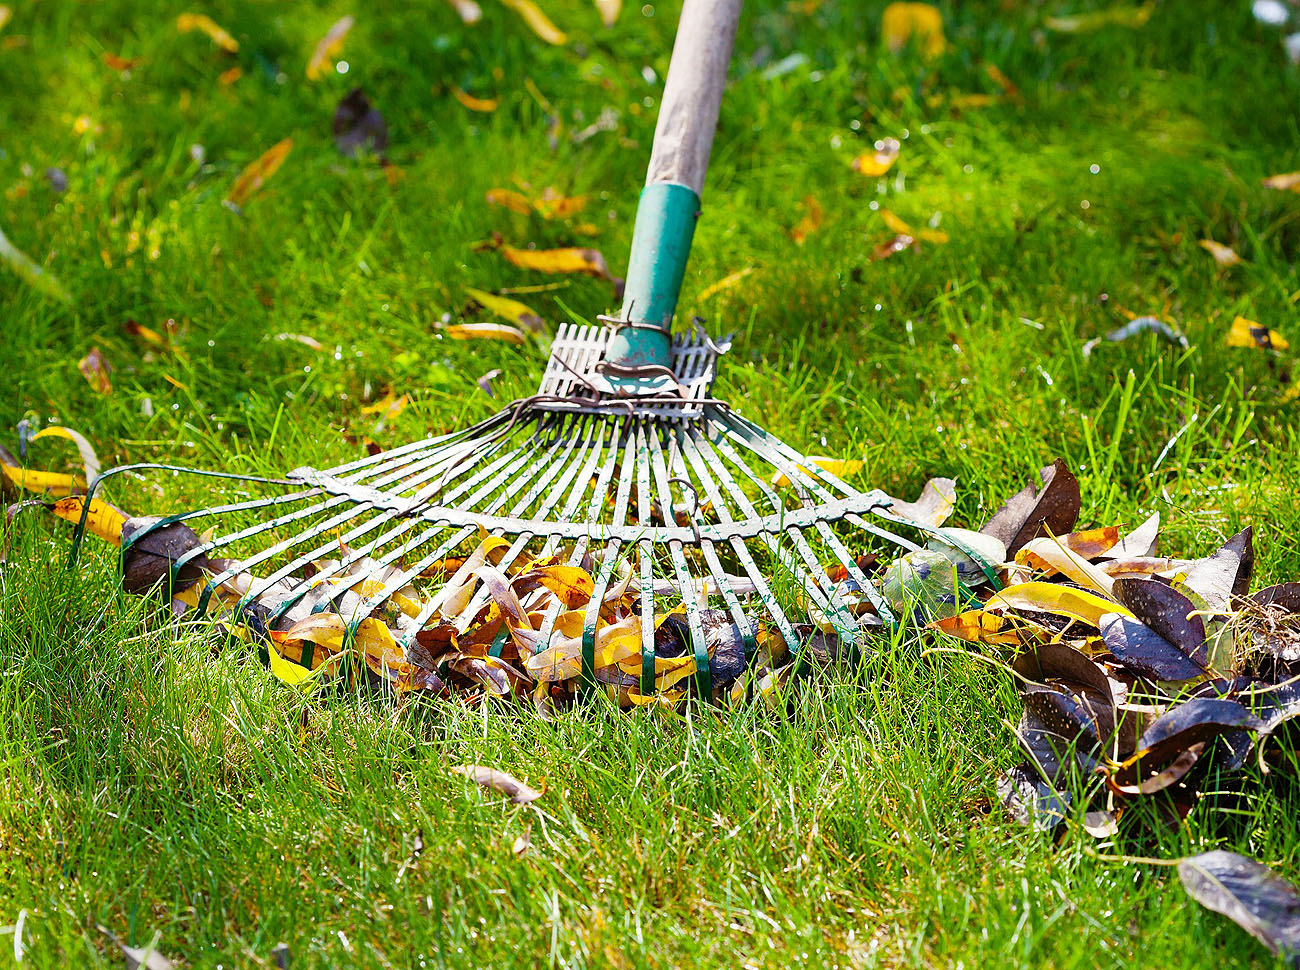 We carry out lawn treatments 2-3 times a year, once in the spring, once in the summer and then once in the autumn. During very dry, hot summers, a mid-summer treatment is not possible with soluble feed.